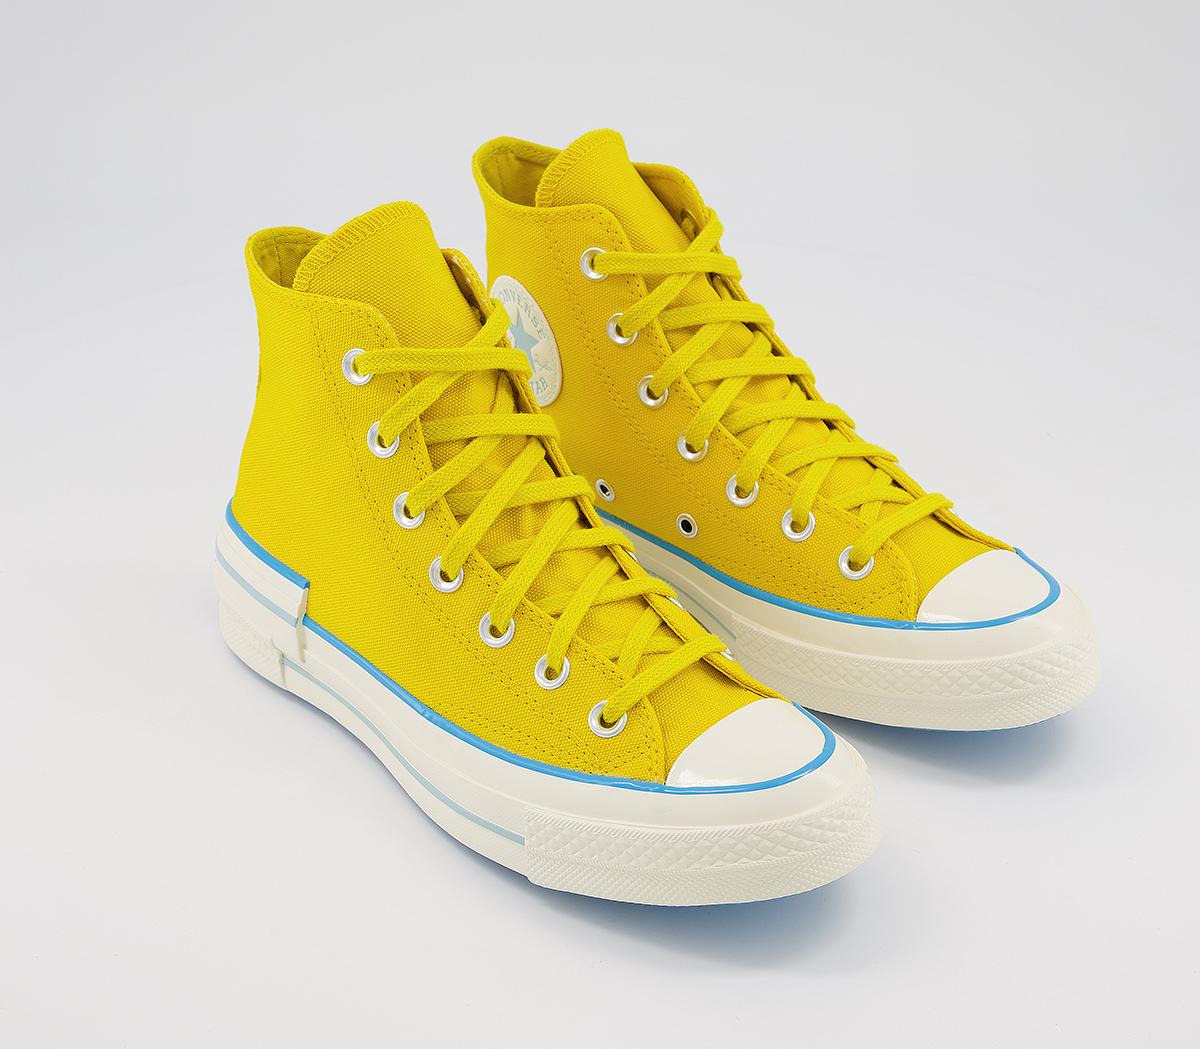 Converse All Star Hi 70s Trainers Speed Yellow Sail Blue Egret - Unisex ...